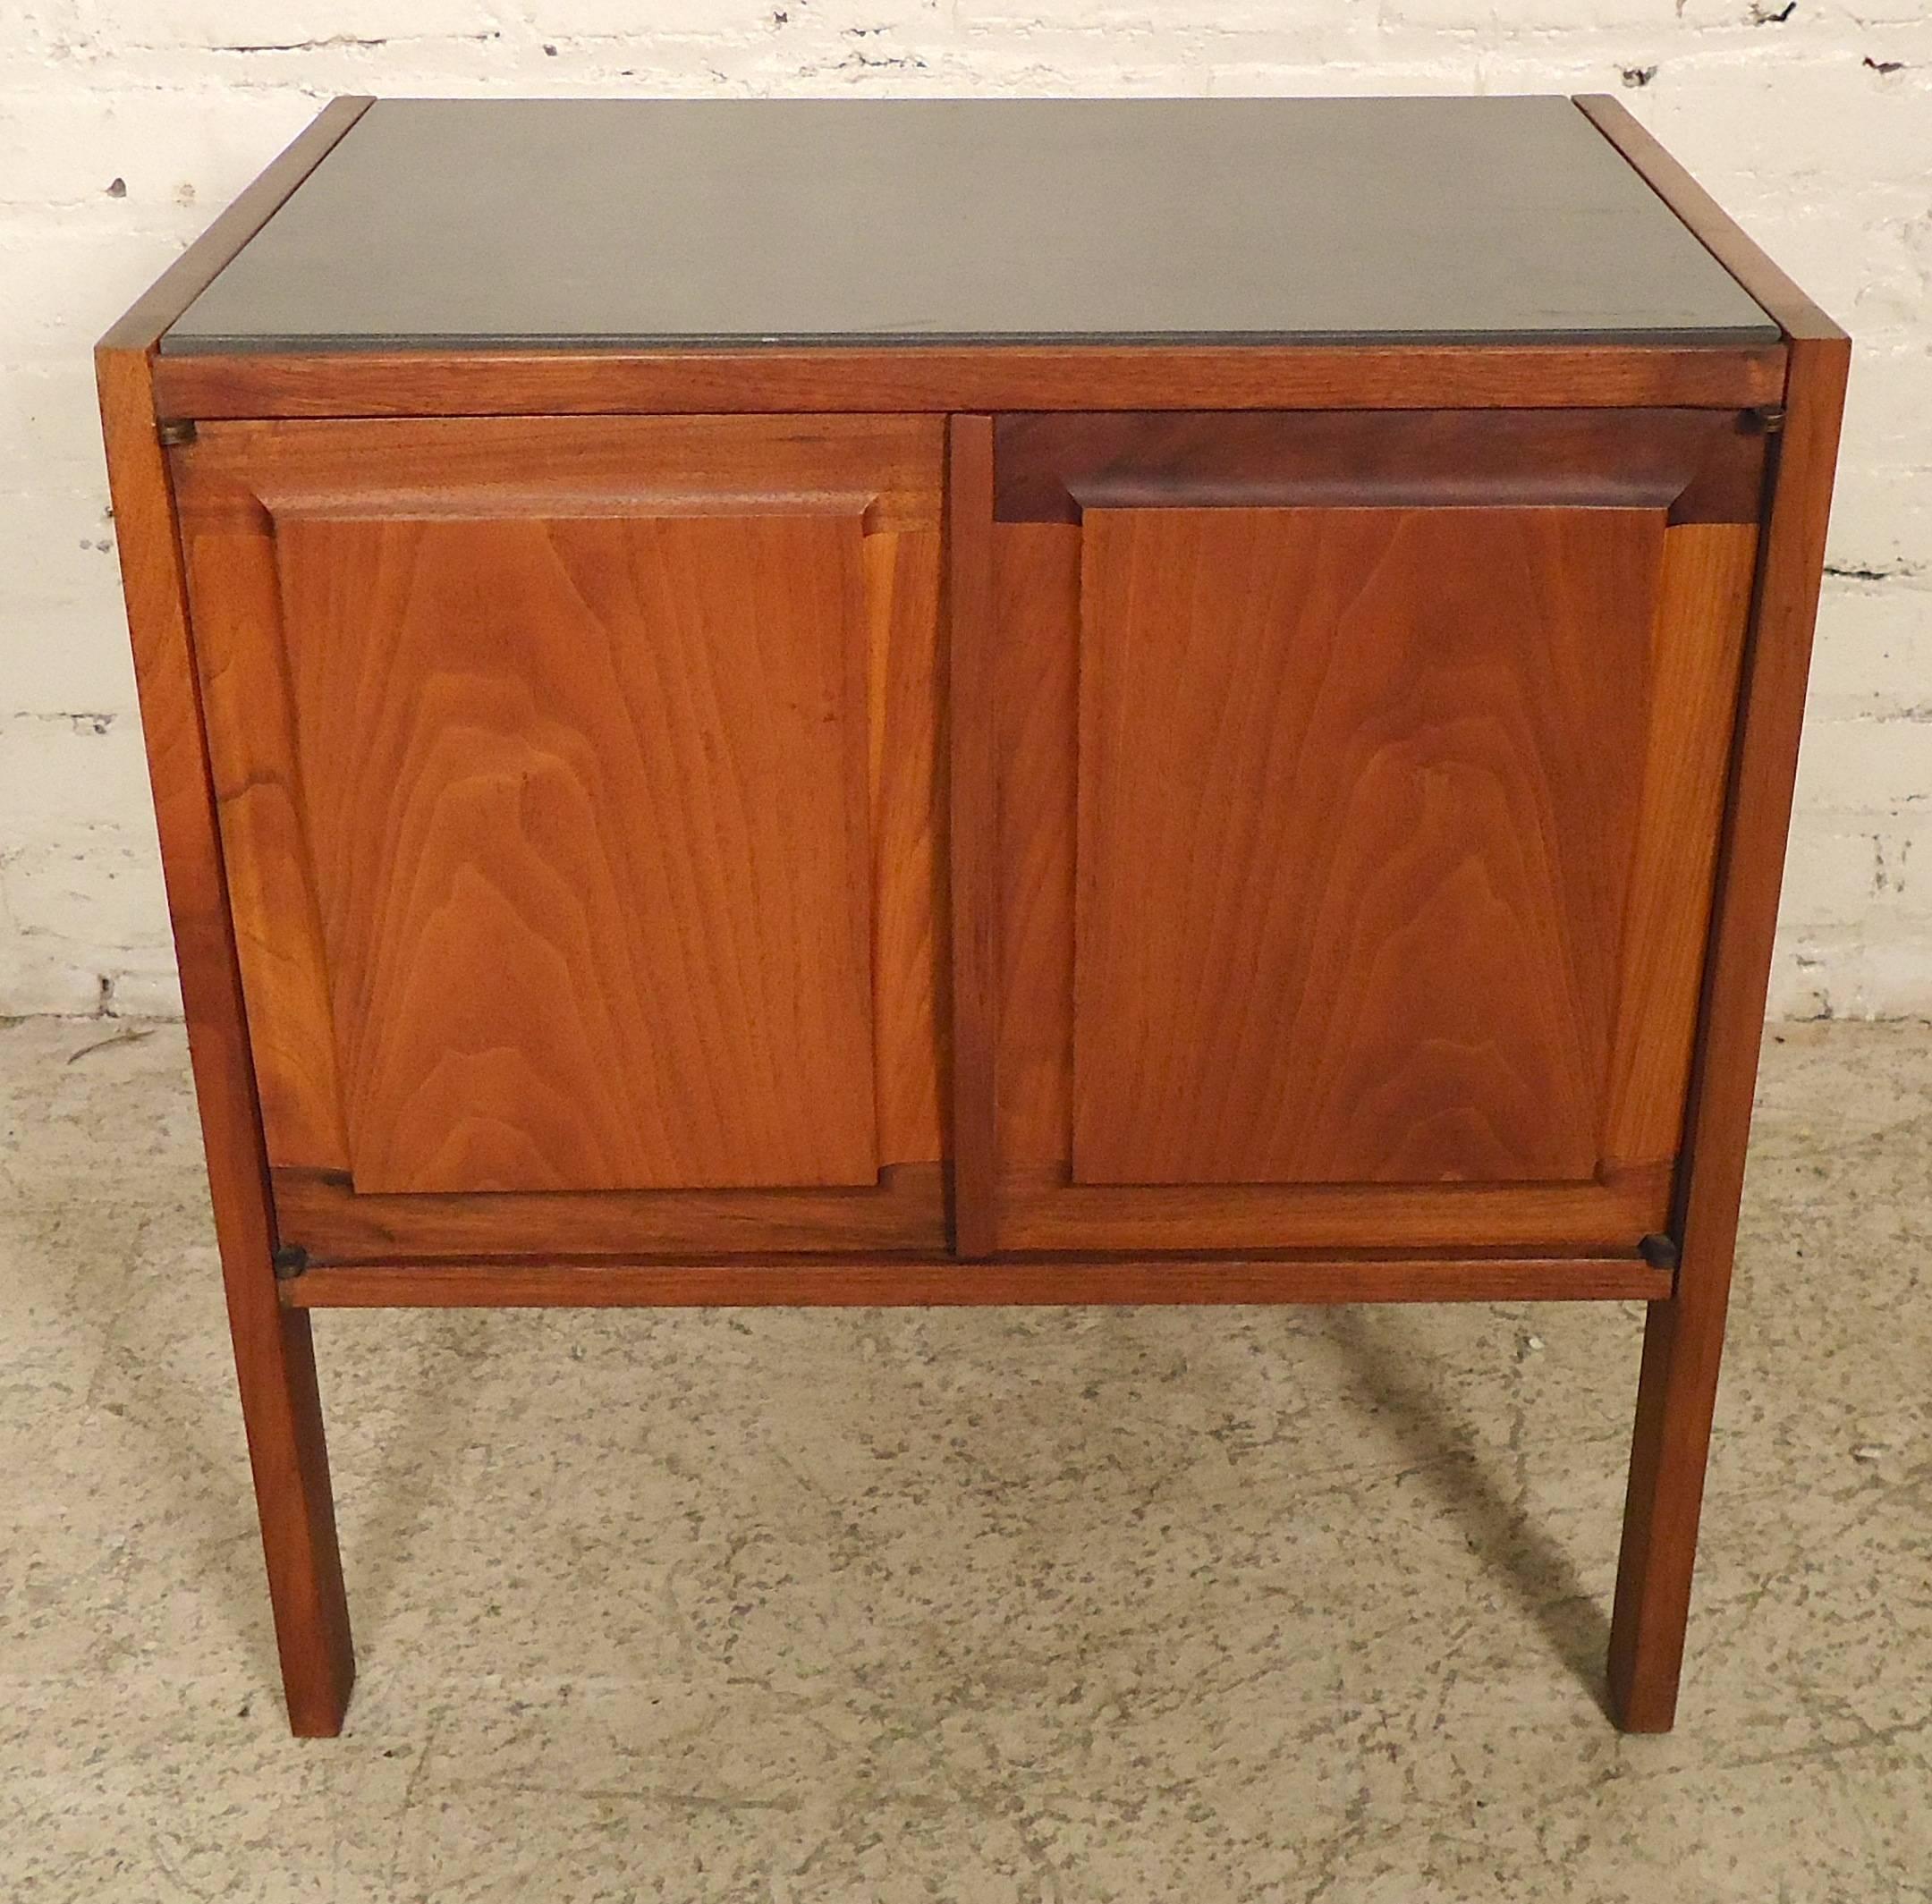 Unusual stone top bedside table with warm teak grain. Attractive two-door table with finished sides and back with open cabinet and drawer storage.

(Please confirm item location - NY or NJ with dealer).
 